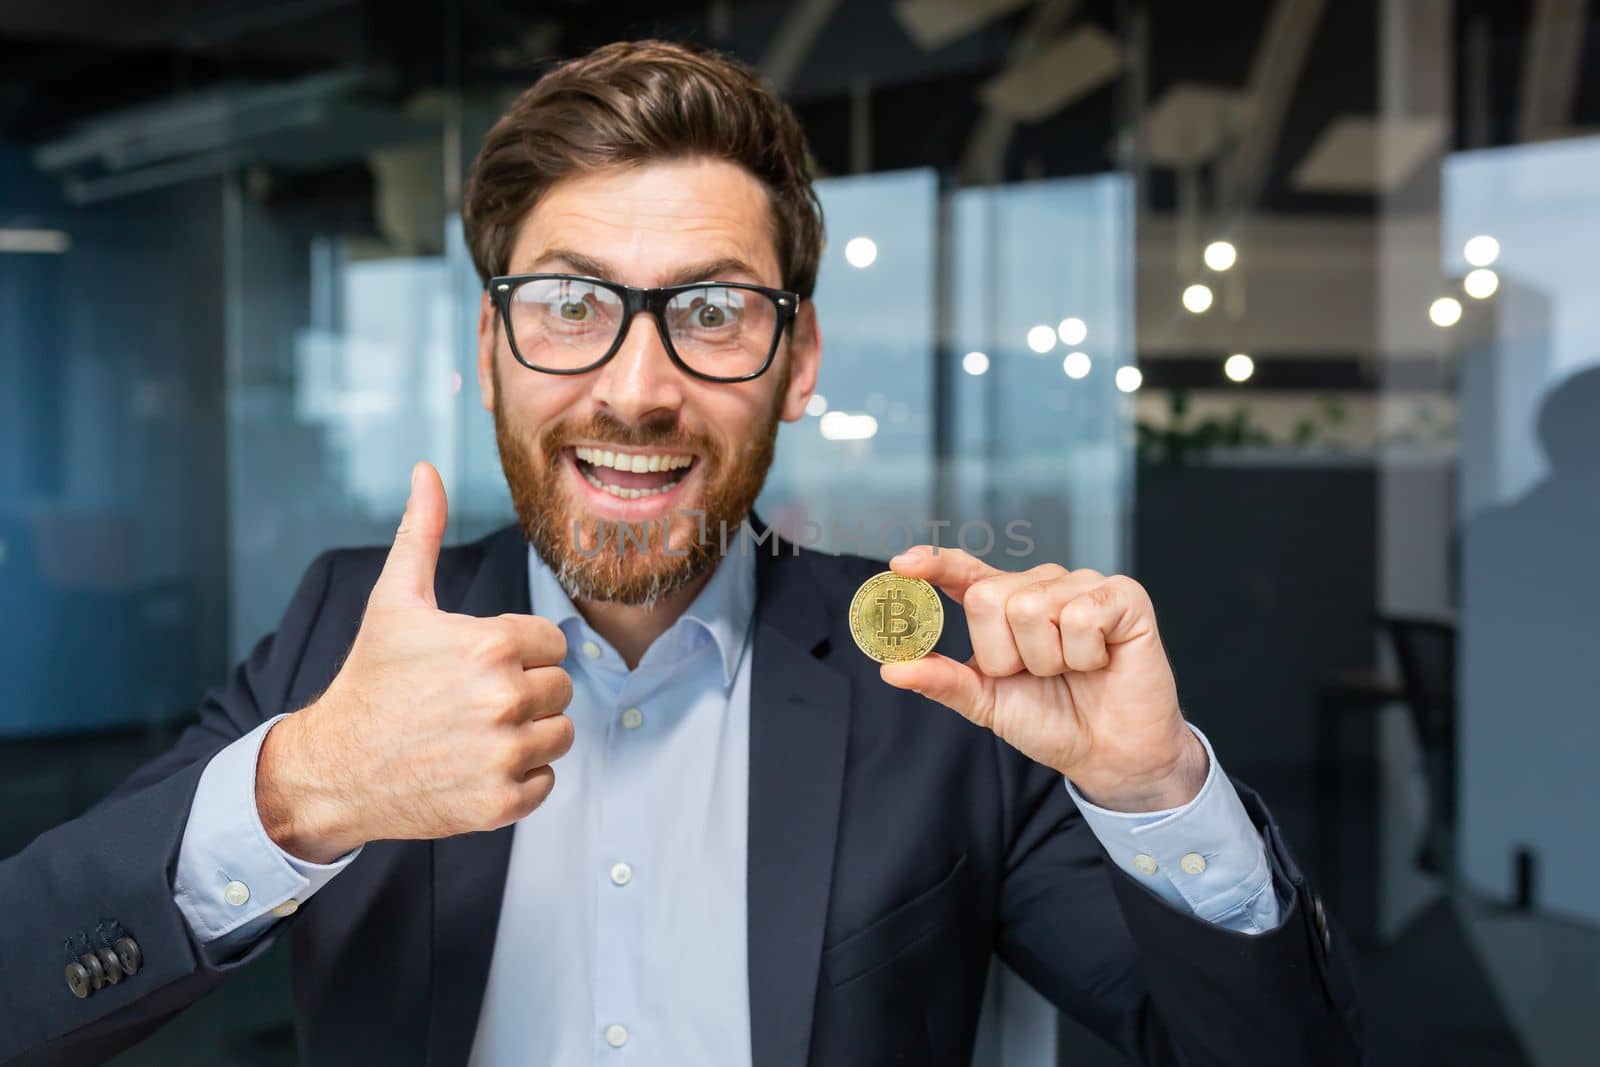 Portrait of mature successful businessman investor, man shows cryptocurrency gold coin to camera and thumbs up firmly, man works on stock exchange inside office online uses laptop.